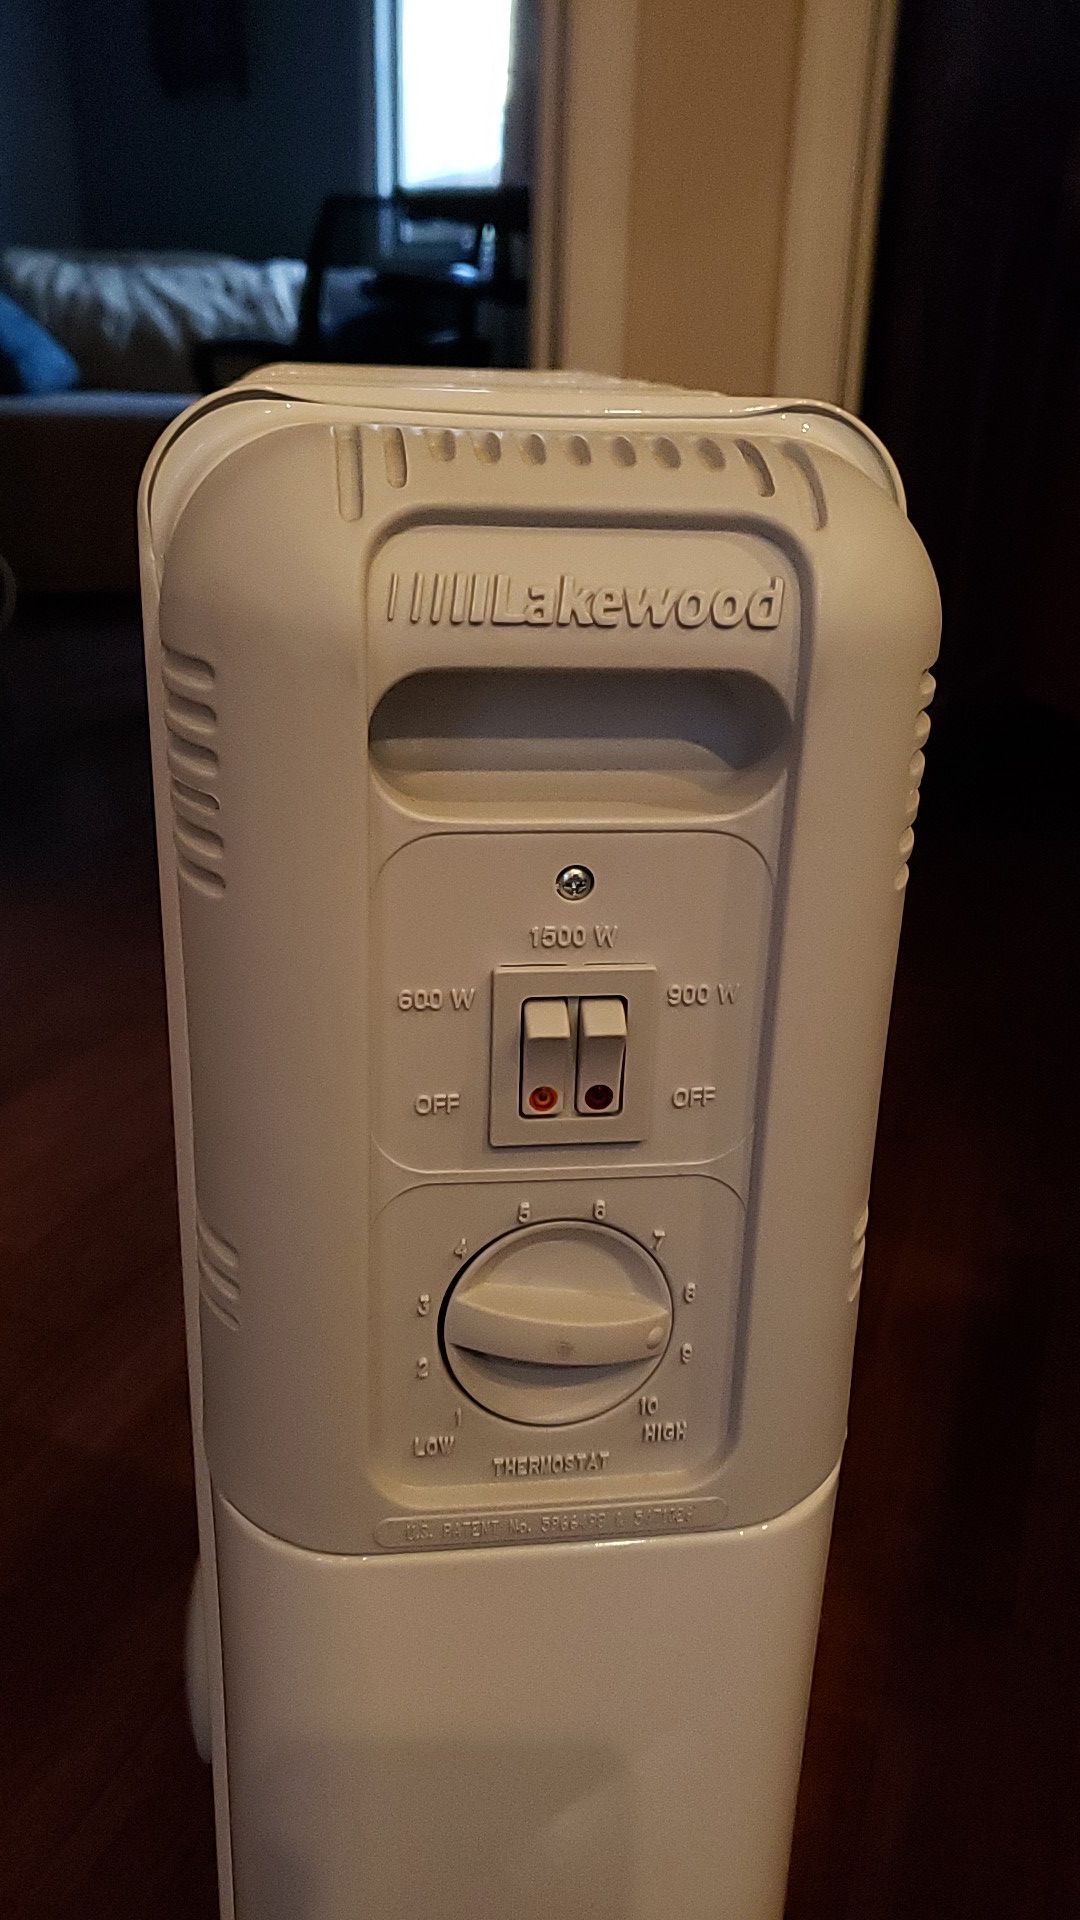 Lakewood model 7101 oil-filled portable electric heater with 3 heating levels (up to 1500W)